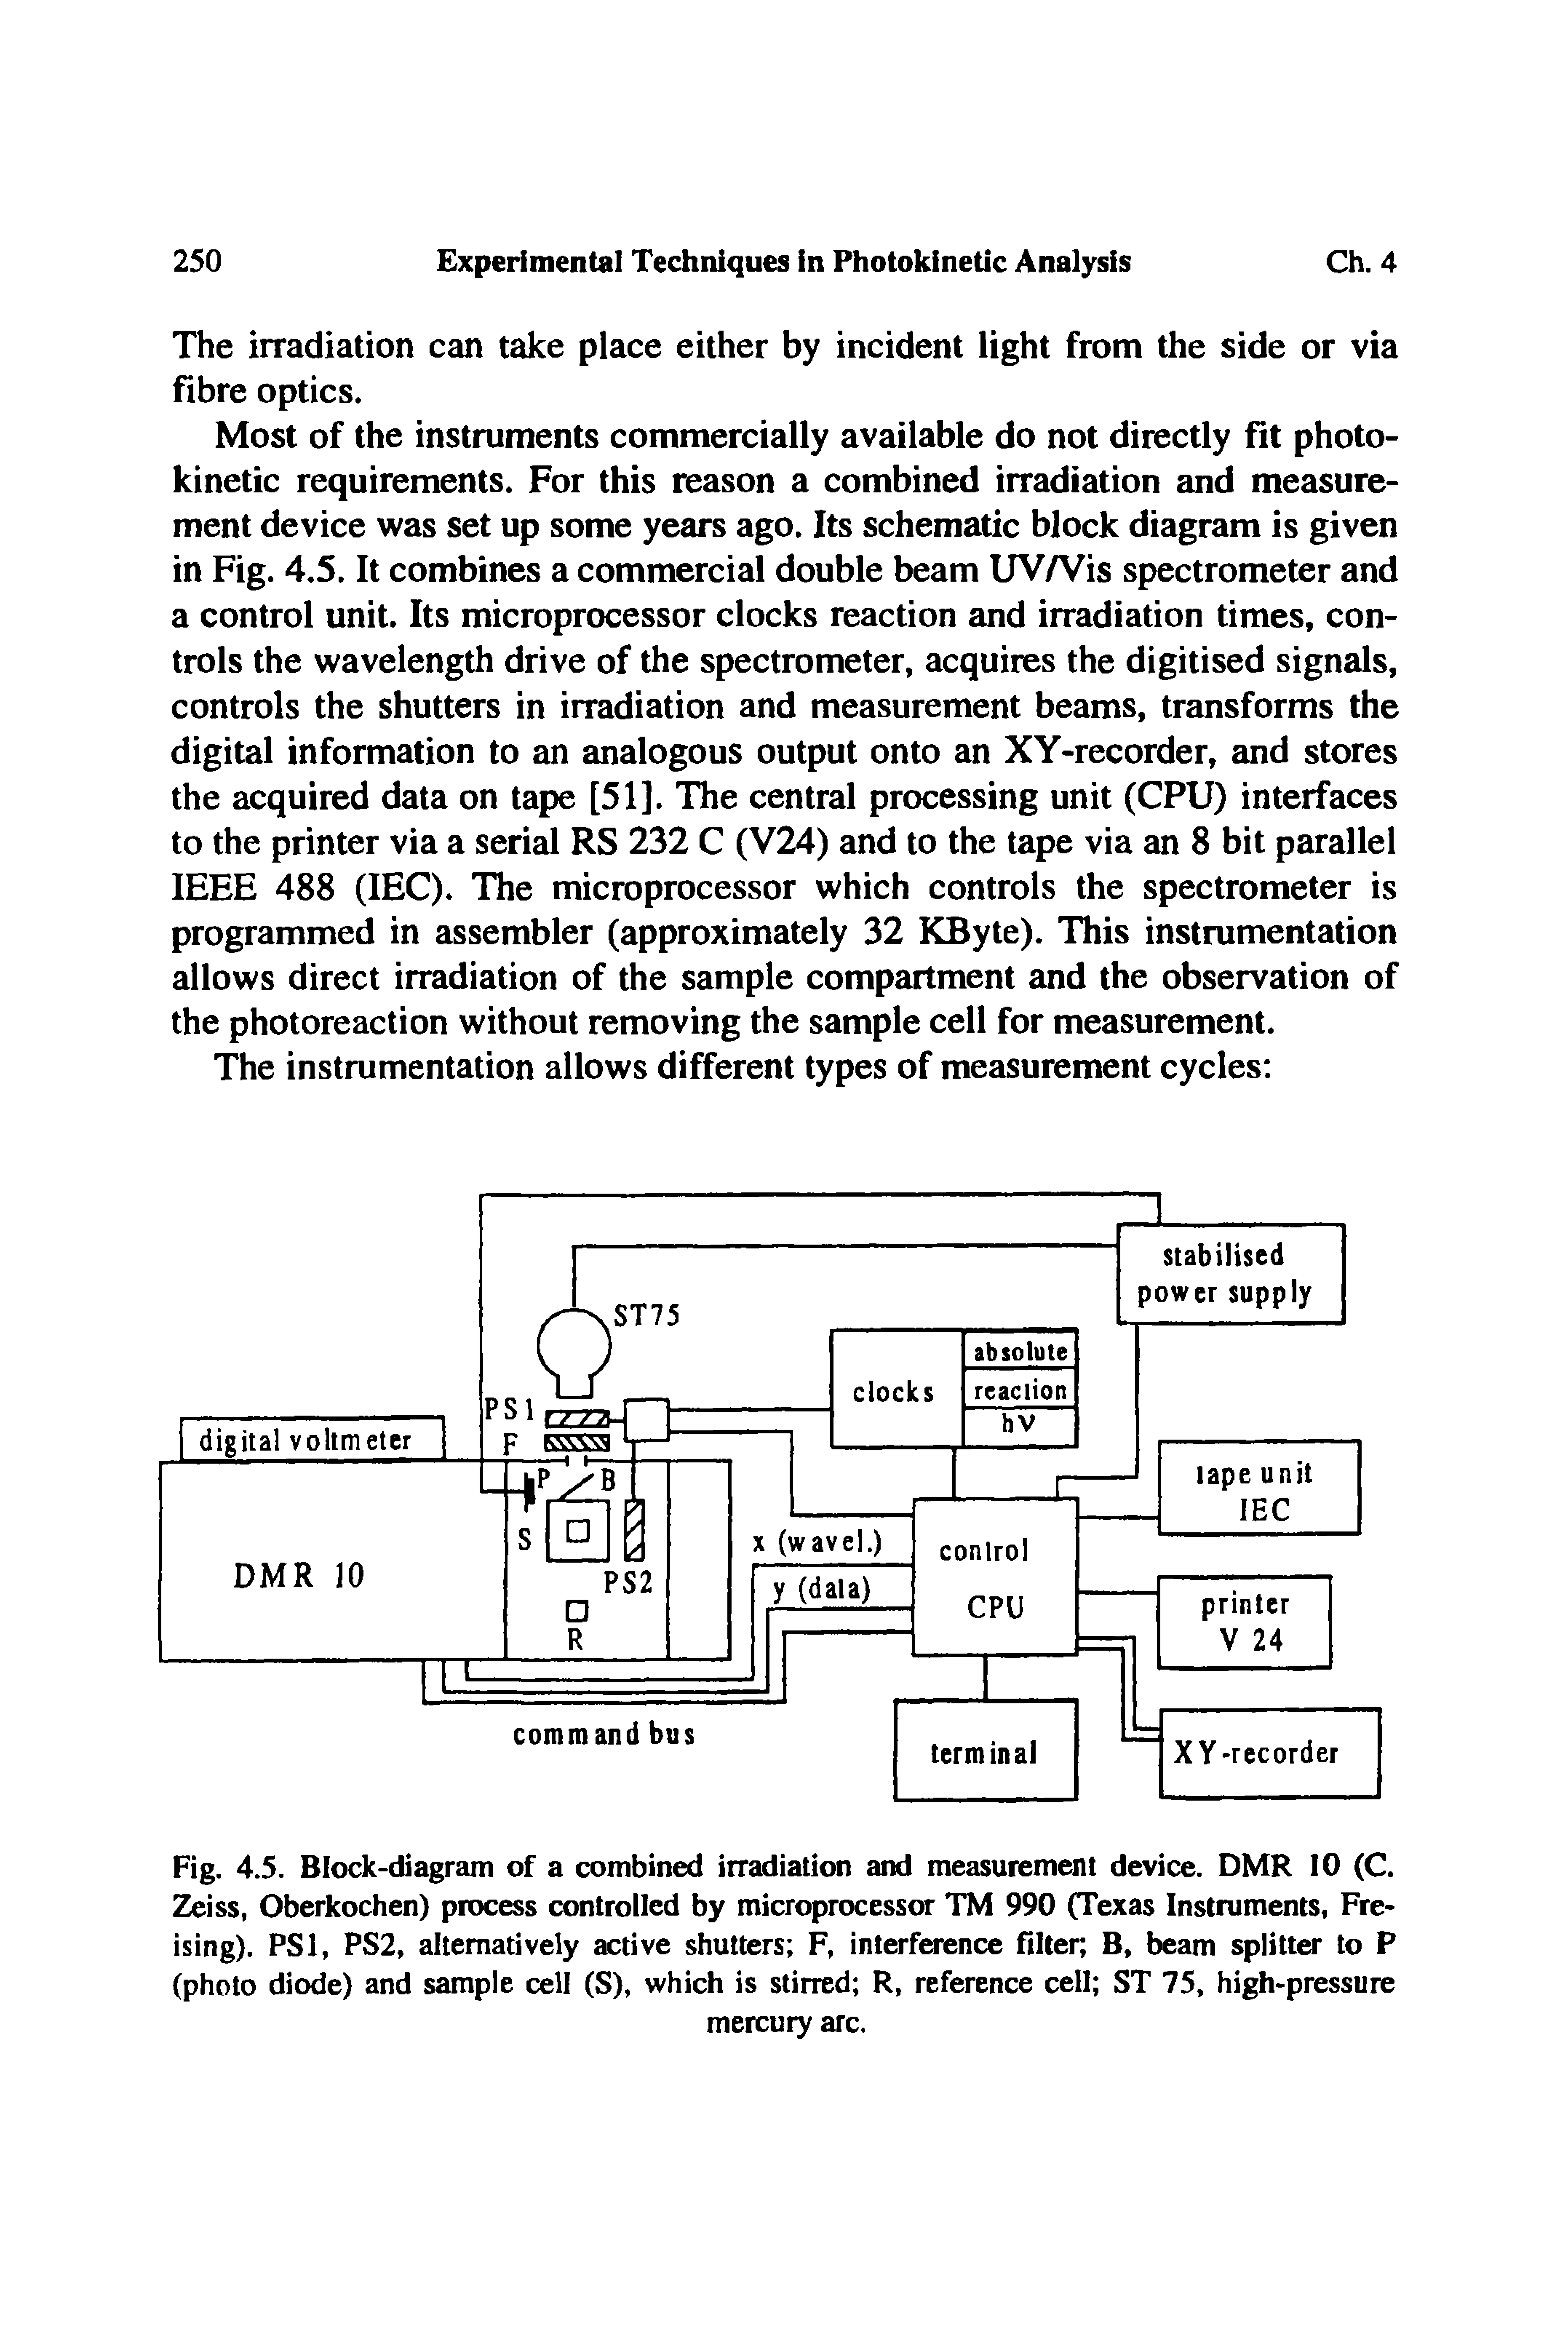 Fig. 4.5. Block-diagram of a combined irradiation and measurement device. DMR 10 (C. Zeiss, Oberkochen) process controlled by microprocessor TM 990 (Texas Instruments, Freising). PSl, PS2, alternatively active shutters F, interference filter B, beam splitter to P (photo diode) and sample cell (S), which is stirred R, reference cell ST 75, high-pressure...